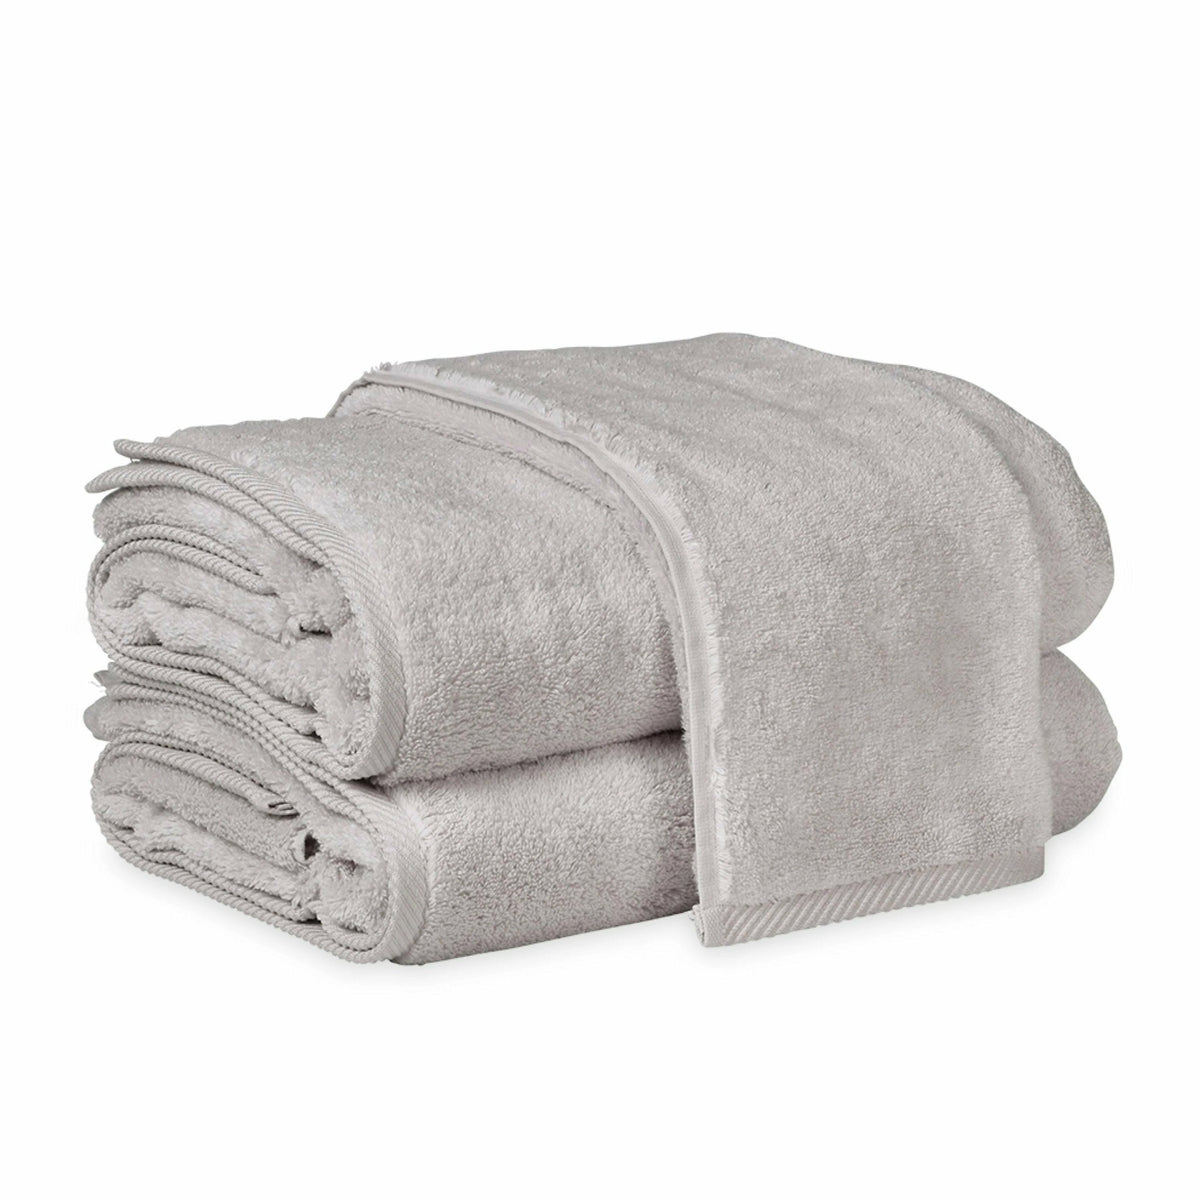 Towel and Linen Mart 100% Cotton 6 Pack Bath Towel Set, Quick Dry, Super  Absorbent, Light Weight, Soft, Multi Colors (27 x 54 Pack of 6)